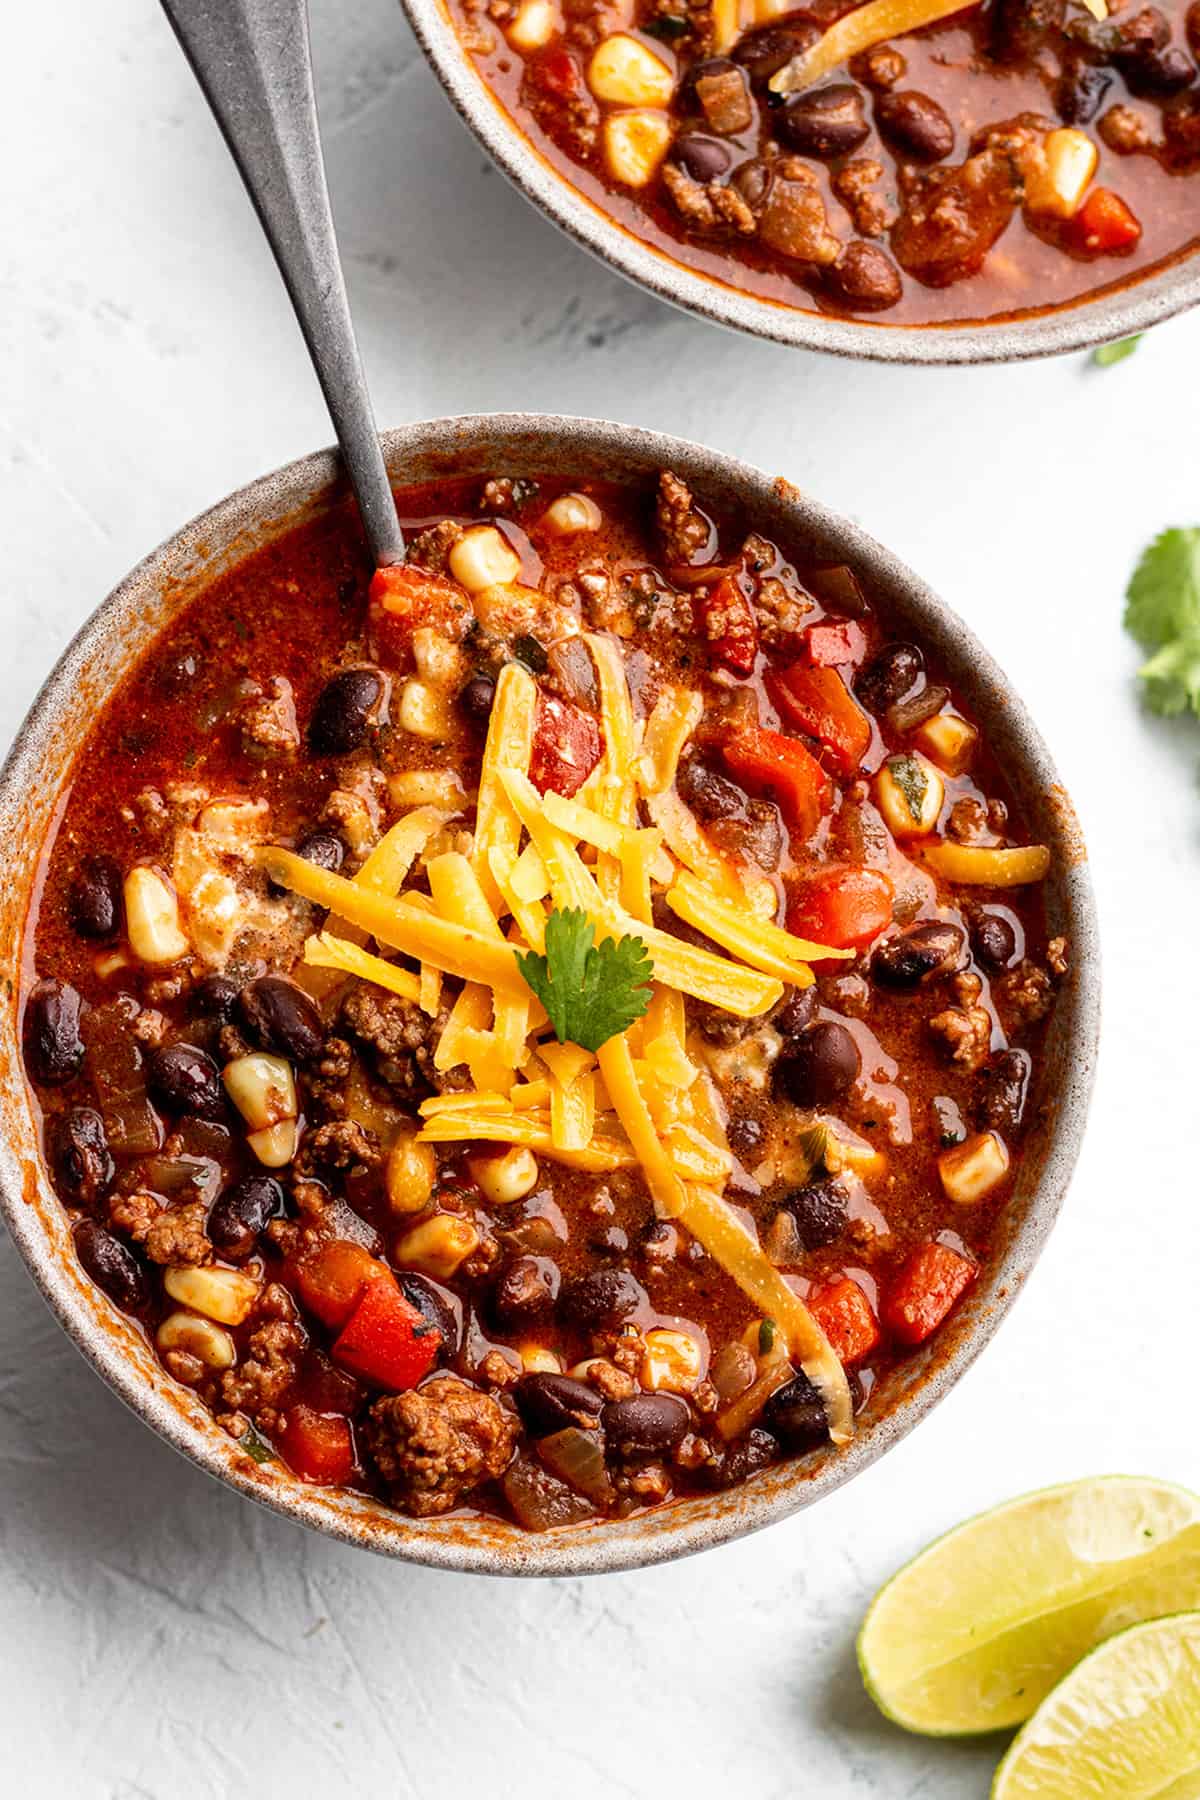 A small bowl with a soup made of beef, black beans, corn with cheddar cheese on top.